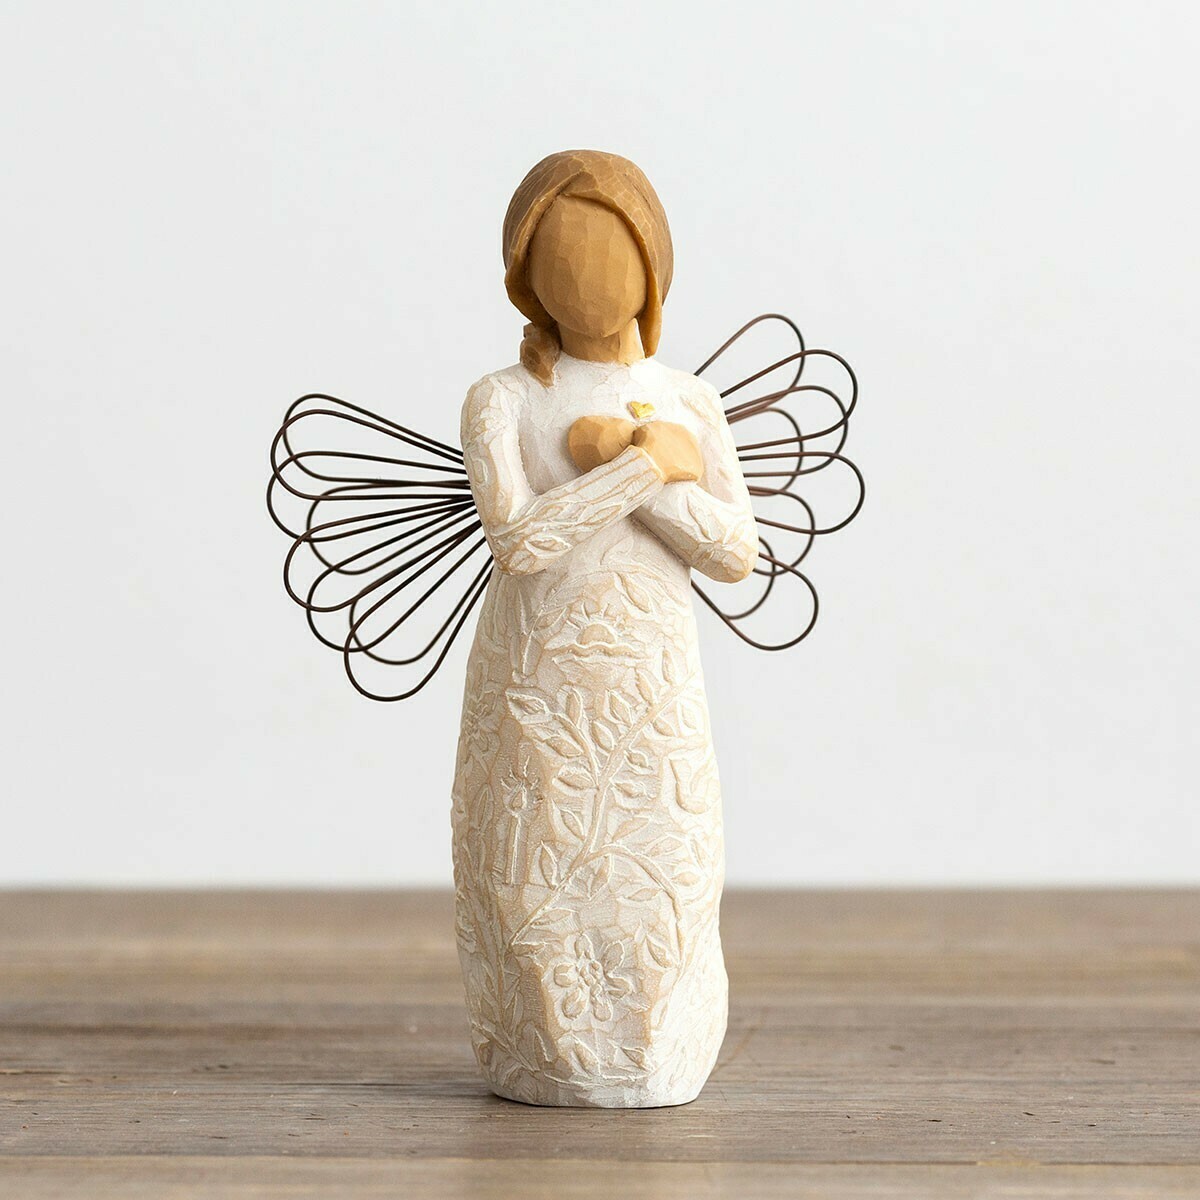 Willow Tree: Remembrance - Angel holding Heart with Wire Wings